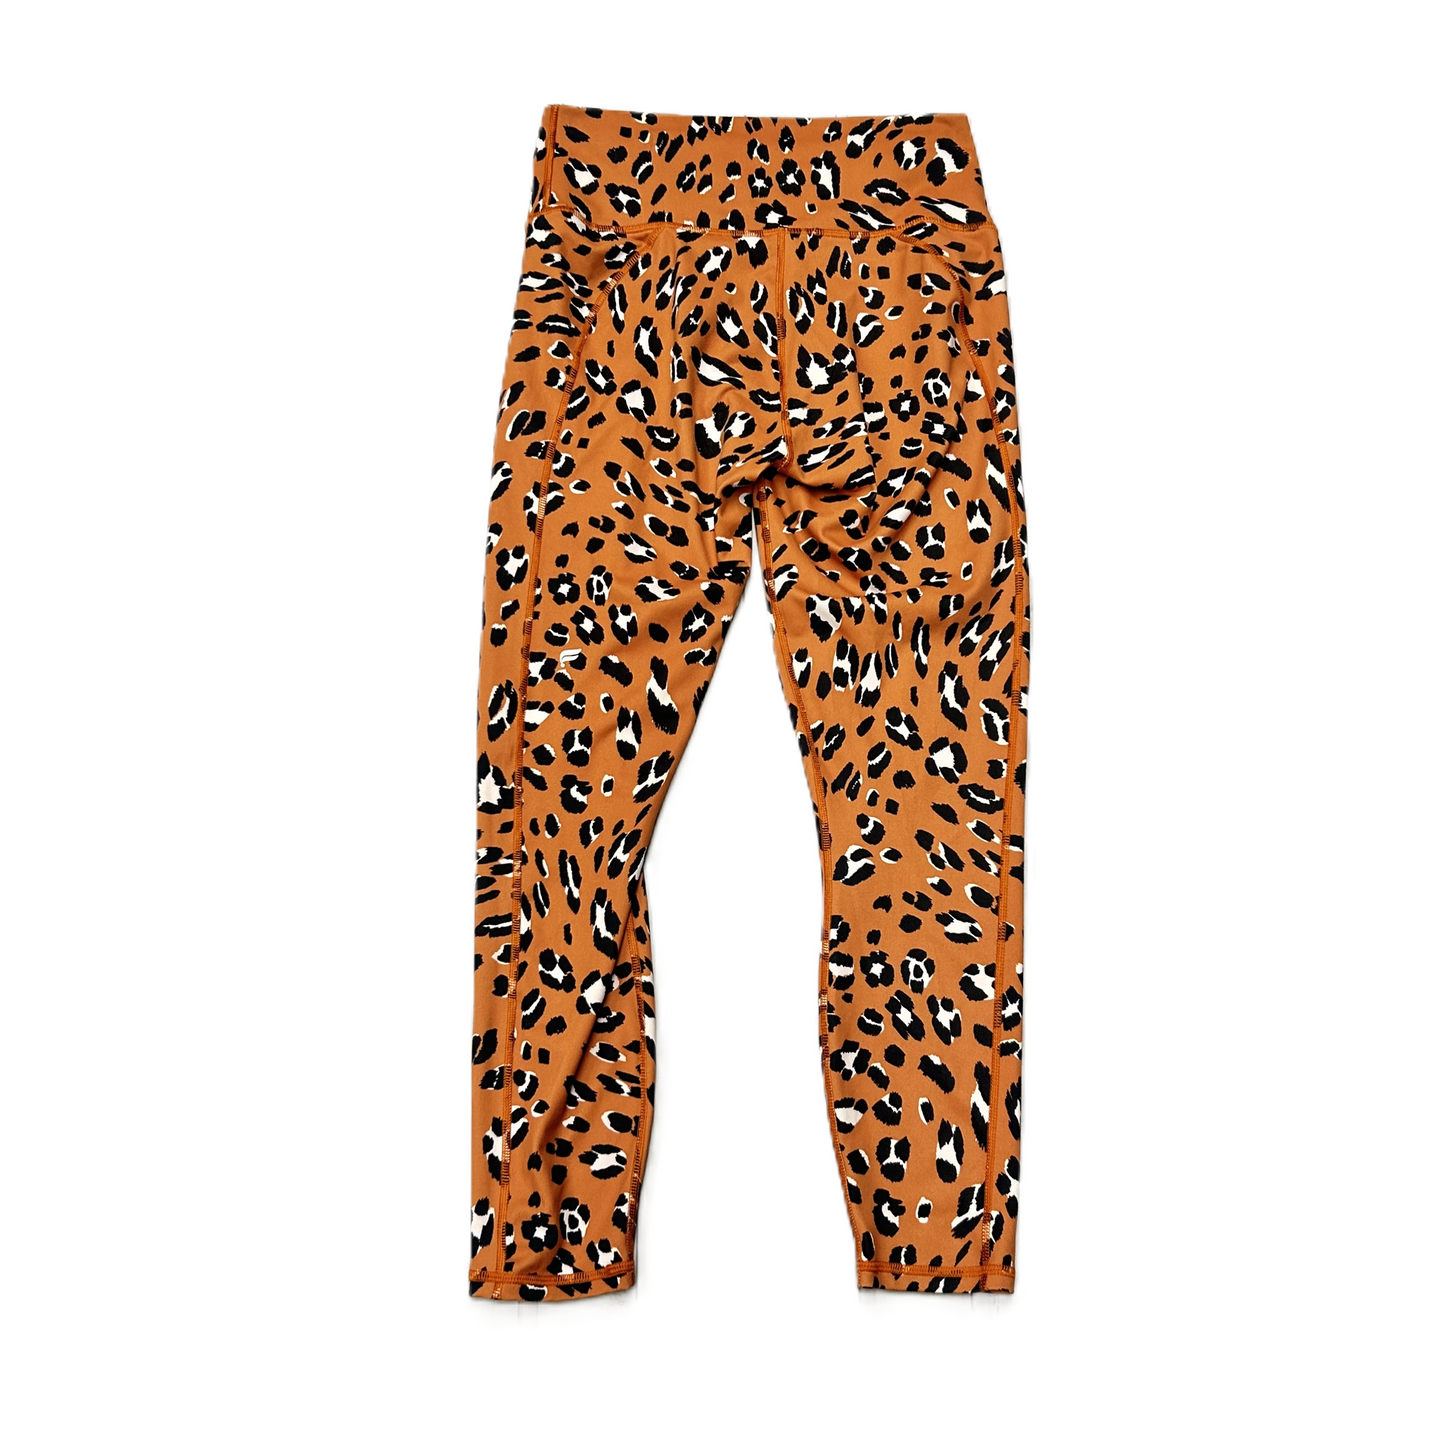 Animal Print Athletic Leggings By Fabletics, Size: S